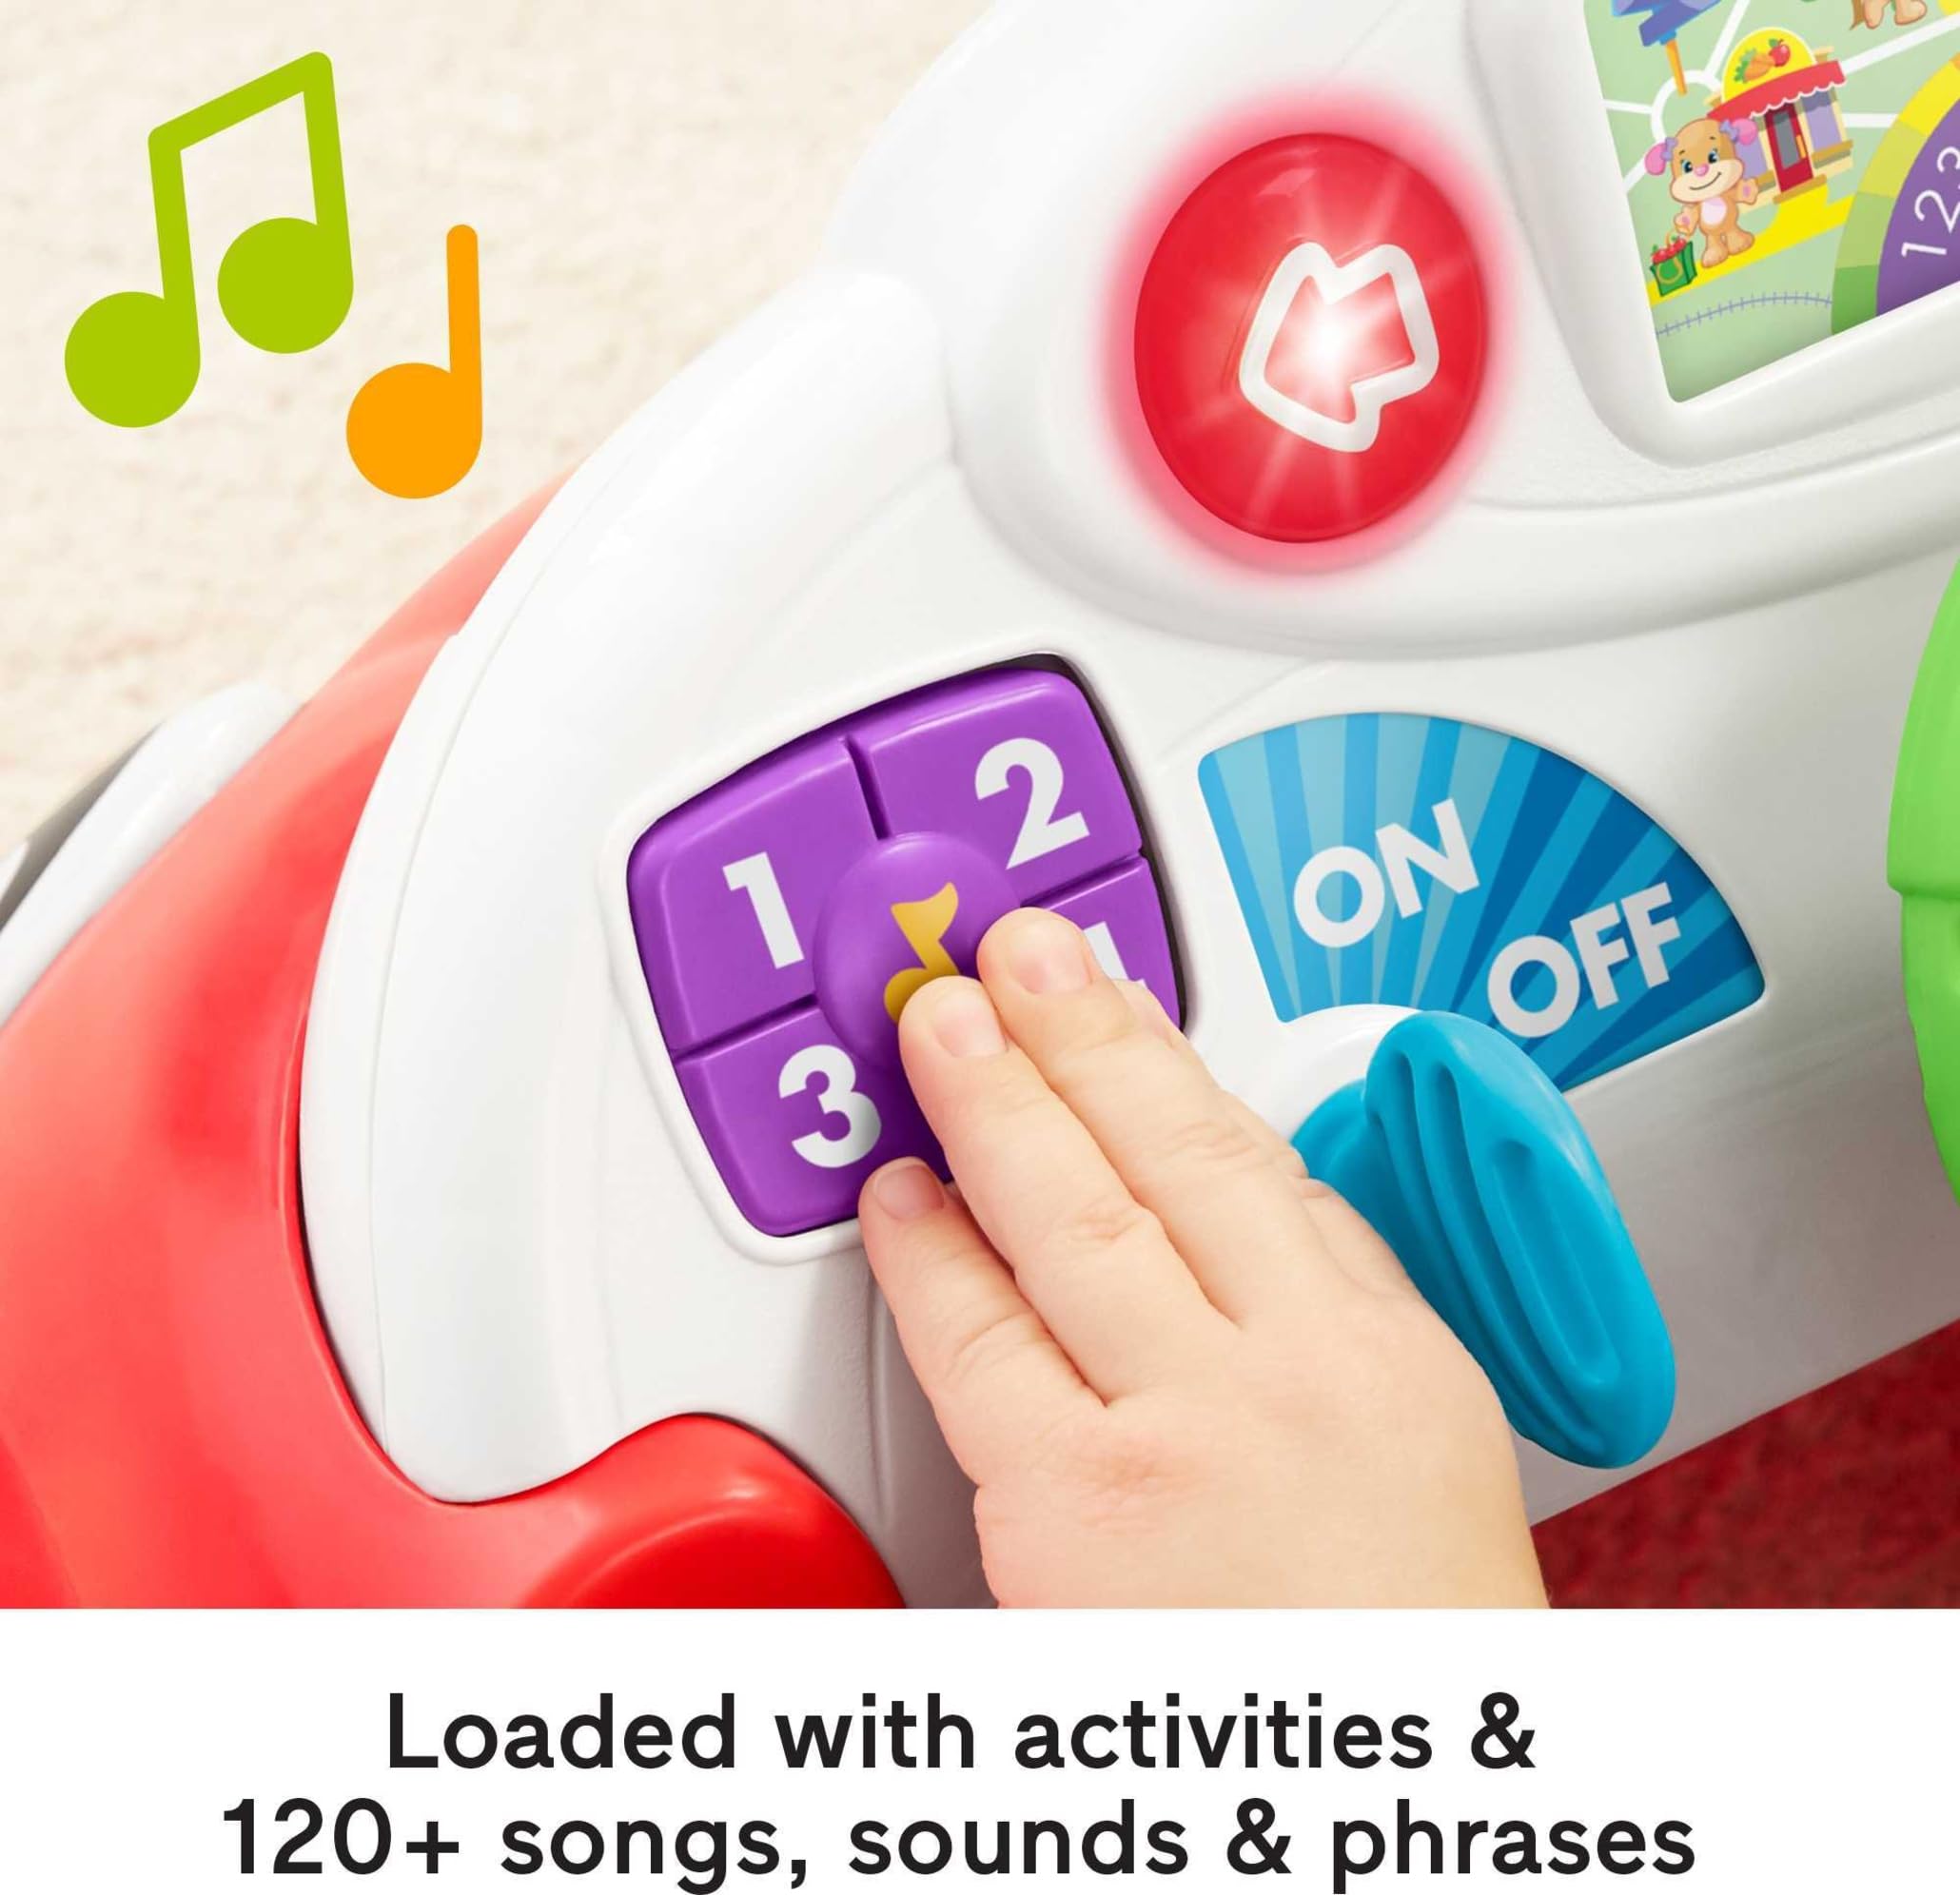 Fisher-Price Laugh & Learn Baby Activity Center Crawl Around Car with Music Lights and Smart Stages for Infants and Toddlers, Red (Amazon Exclusive)